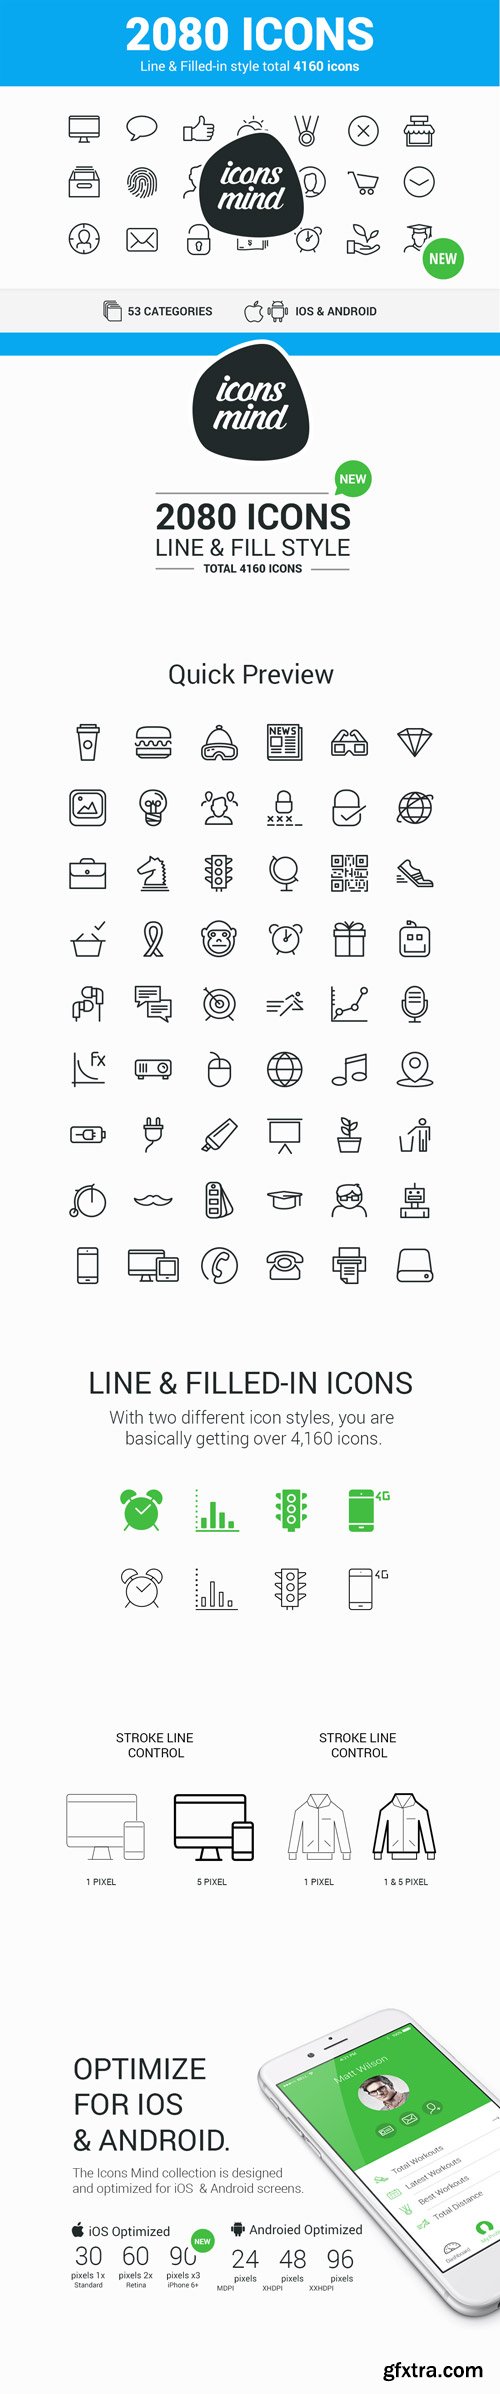 MightyDeals - 2000+ High-Quality Vector Icons (outline and filled)